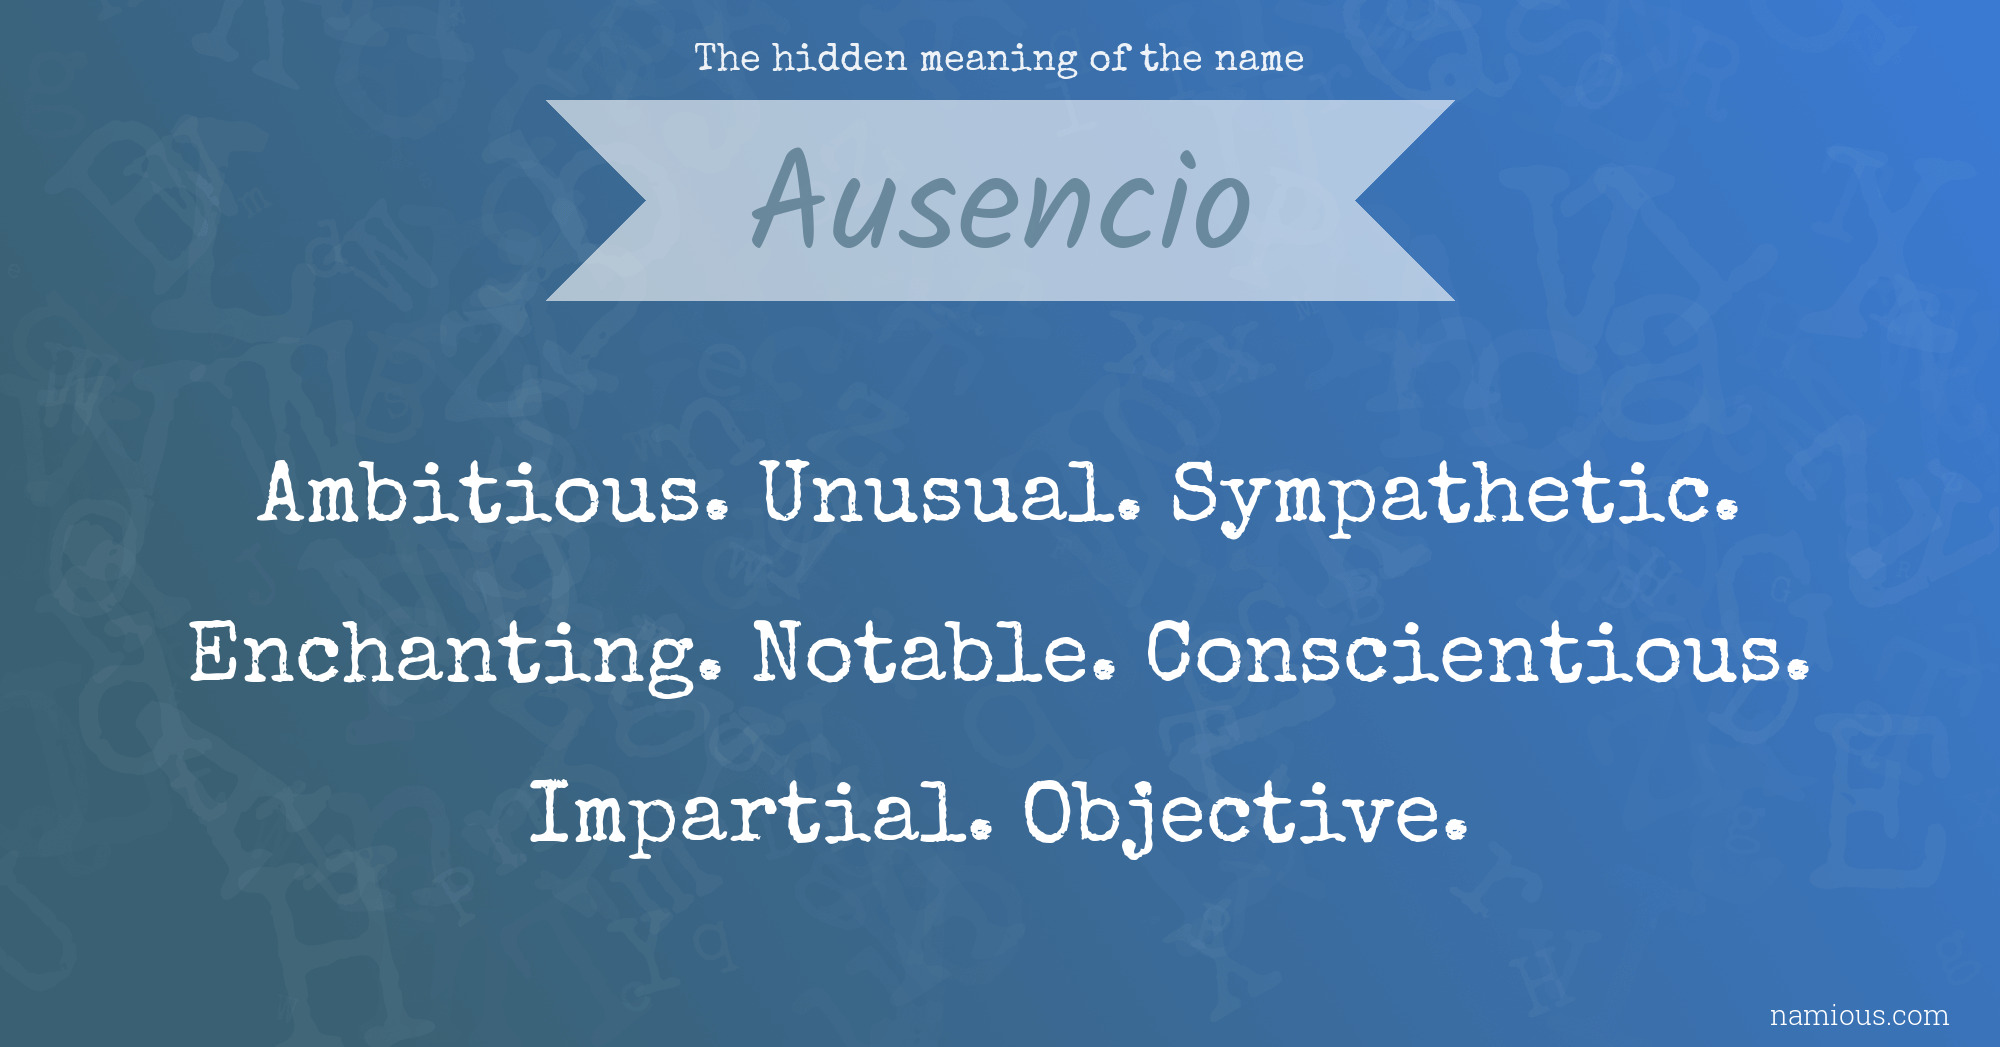 The hidden meaning of the name Ausencio